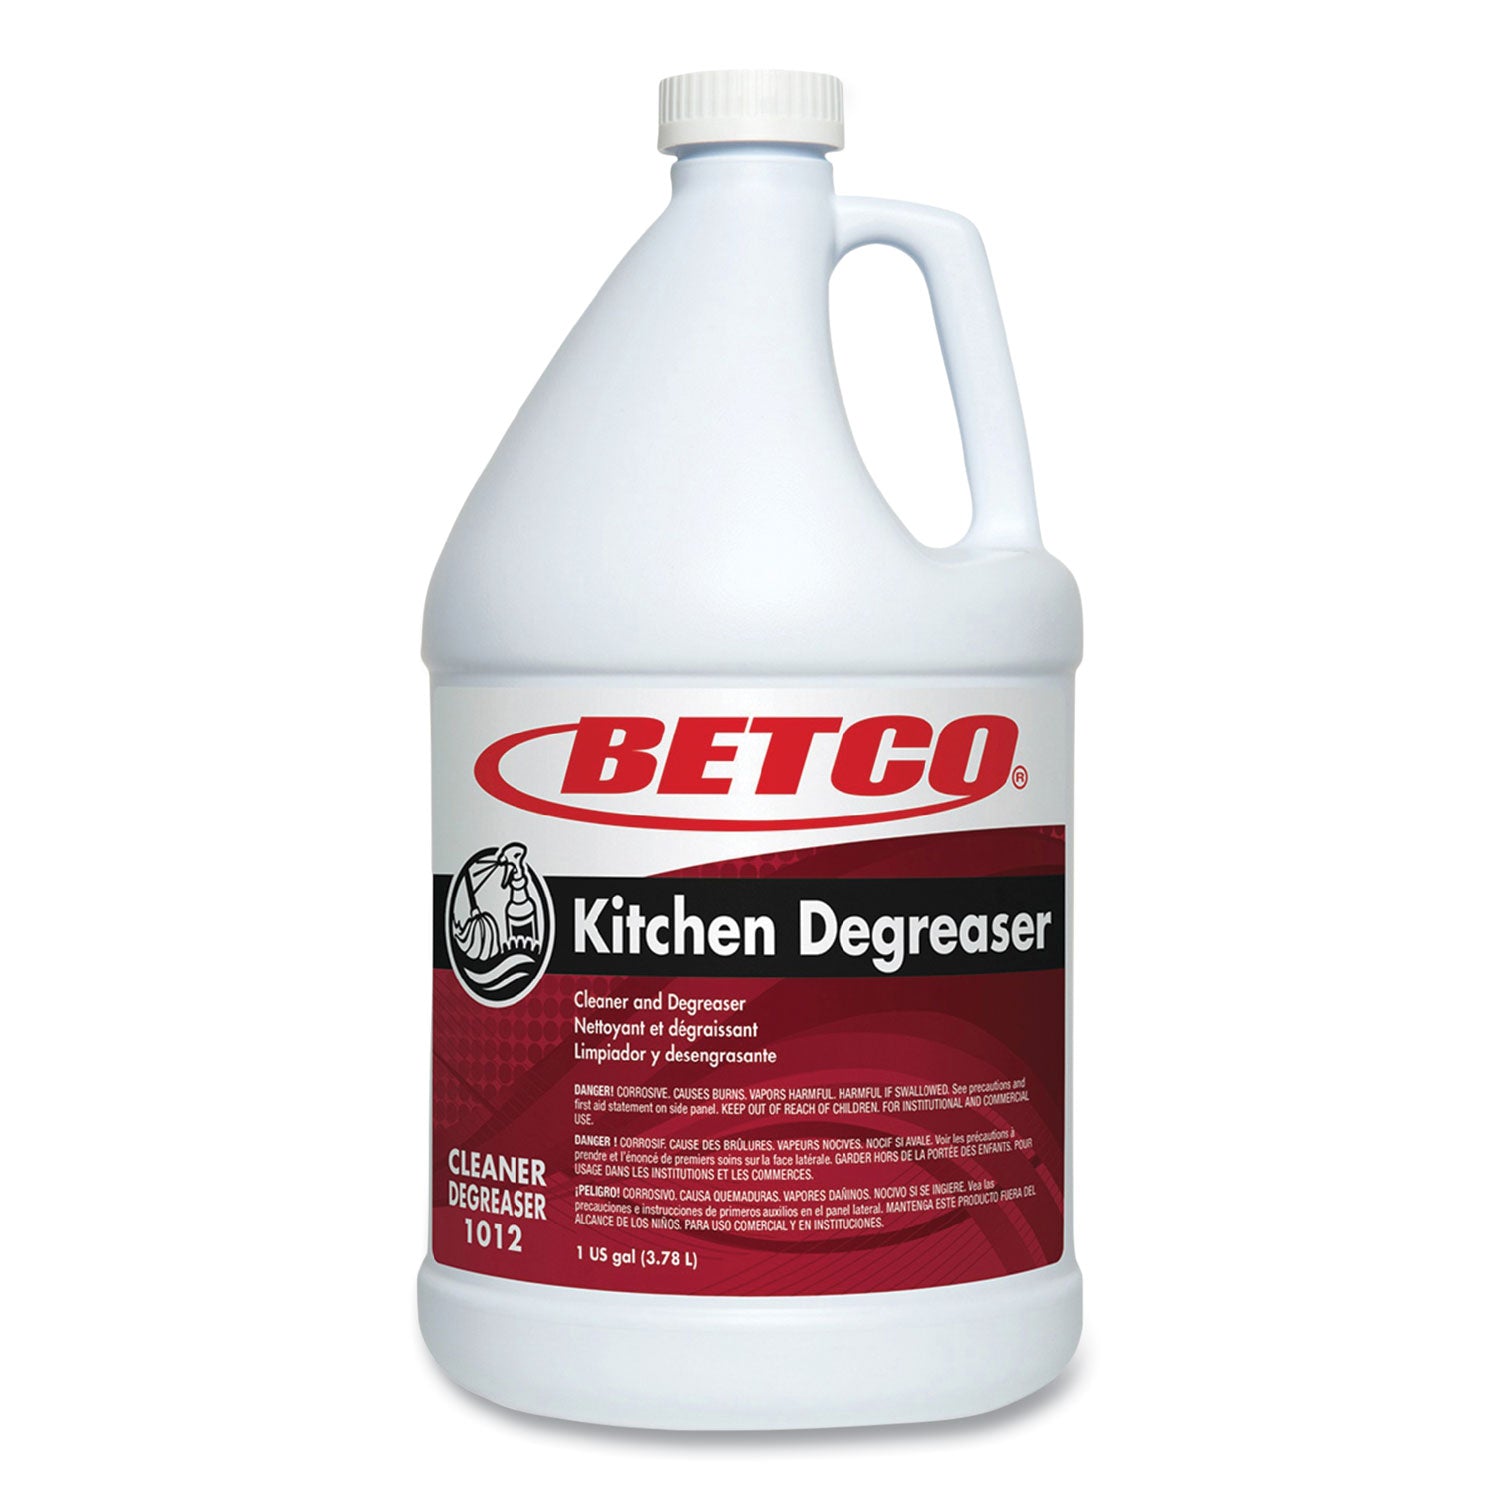 kitchen-degreaser-characteristic-scent-1-gal-bottle-4-carton_bet10120400 - 1